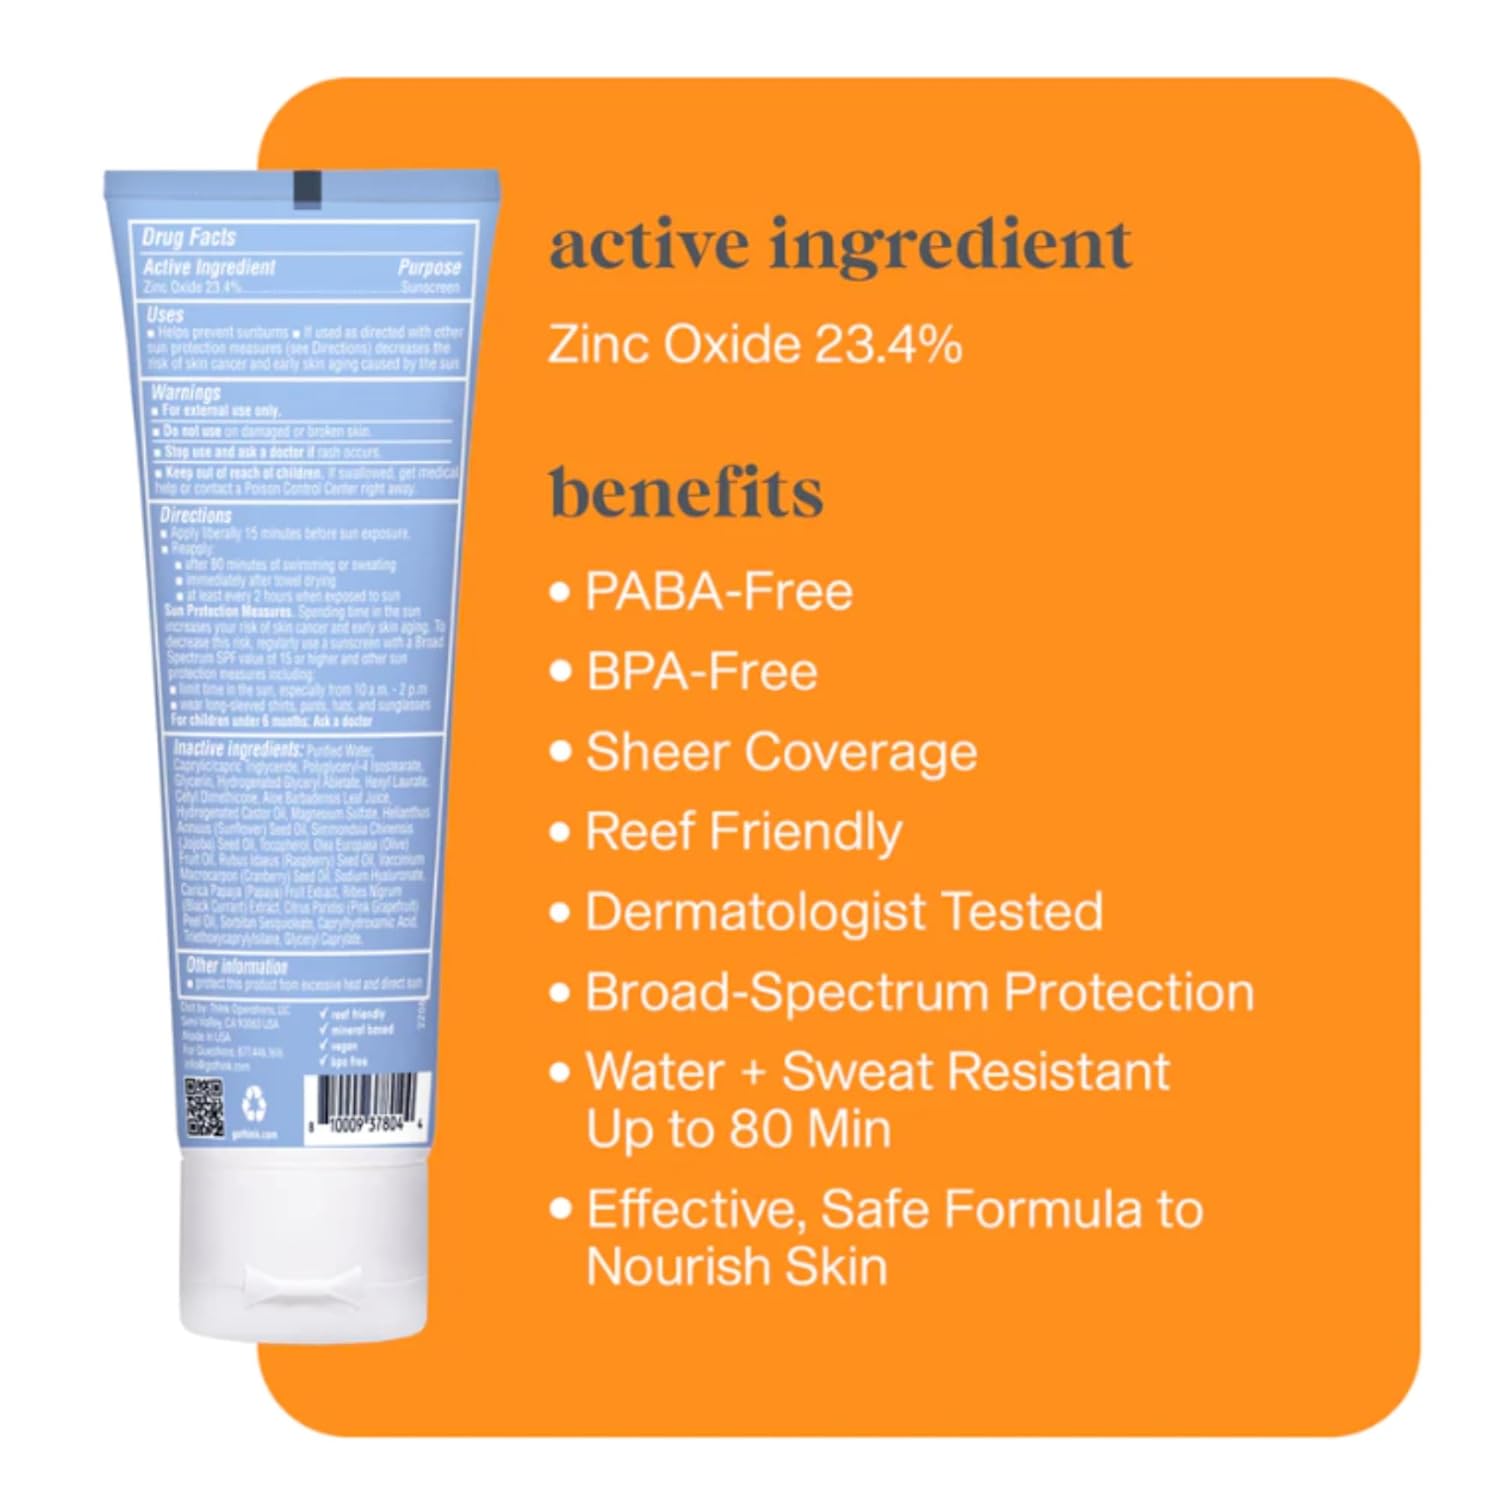 Thinksport SPF 50 Clear Zinc Sunscreen – Waterproof Mineral Sunscreen Lotion – Safe, Natural Zinc Oxide UVA/UVB Sun Protection, Value Size, 6 Fl oz : Beauty & Personal Care